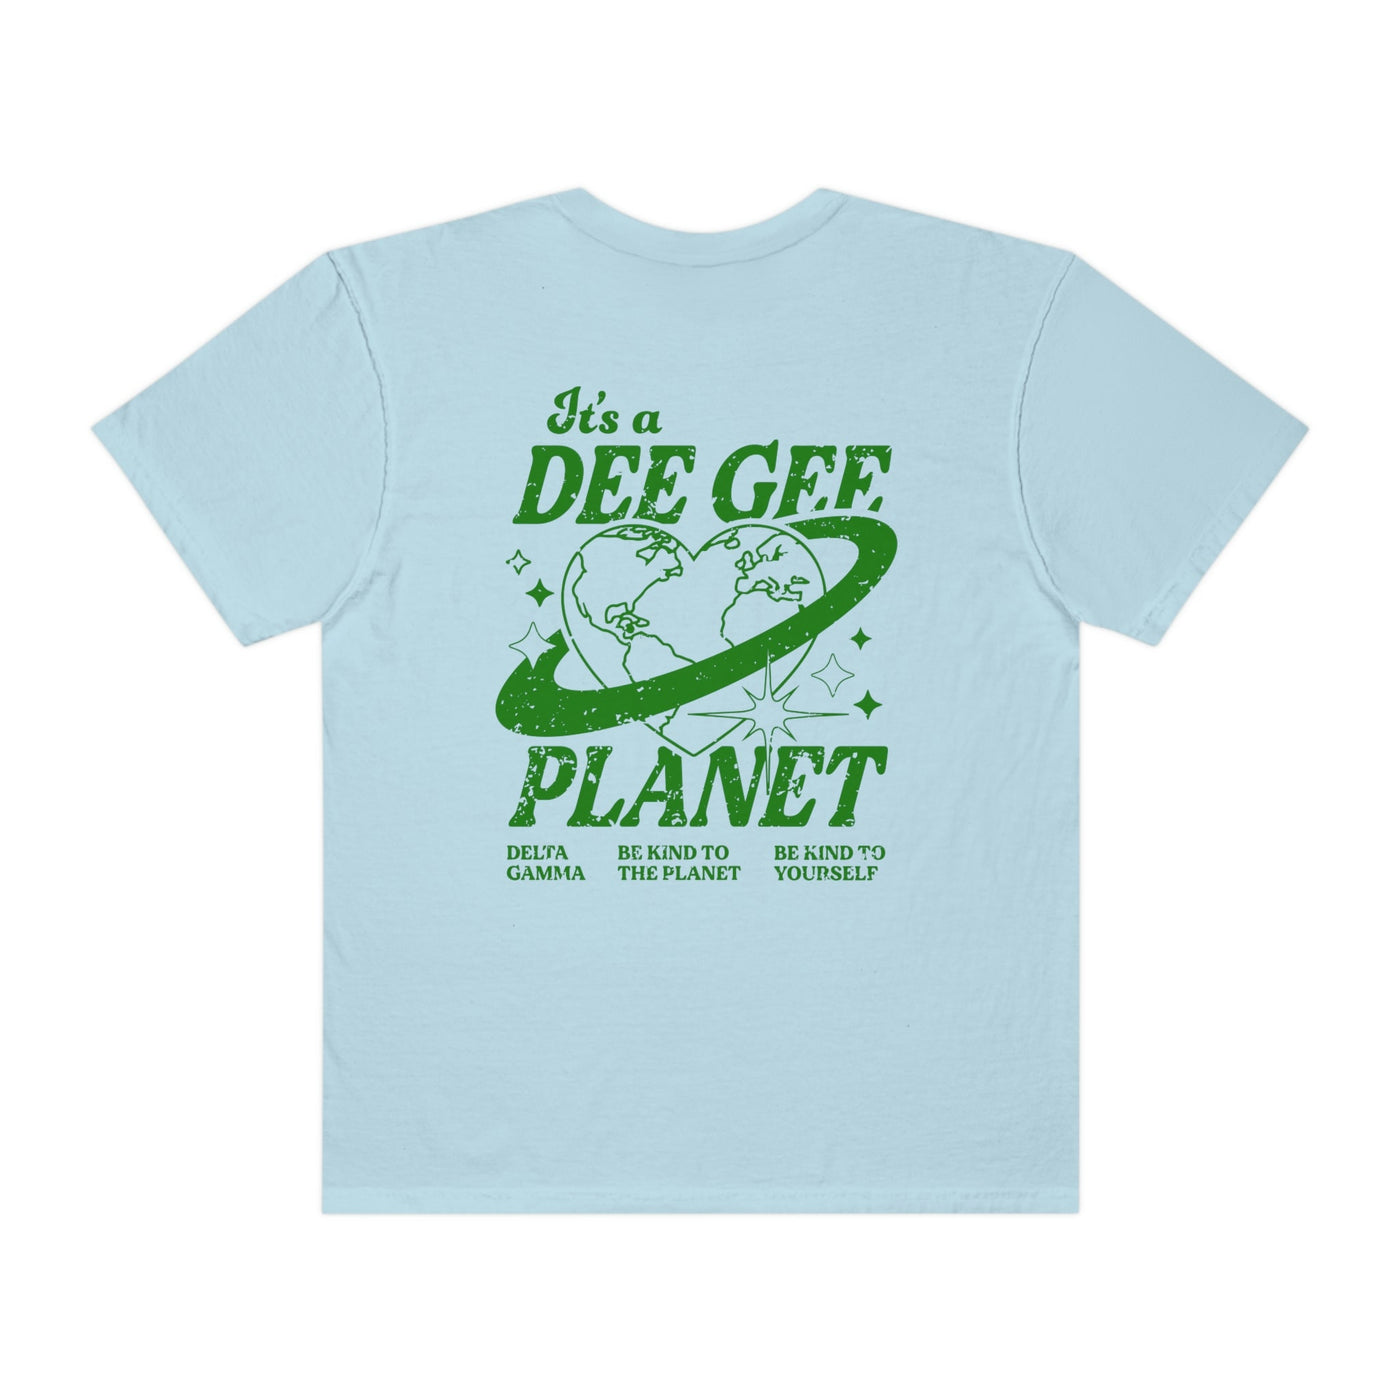 Delta Gamma Planet T-shirt | Be Kind to the Planet Trendy Sorority shirt